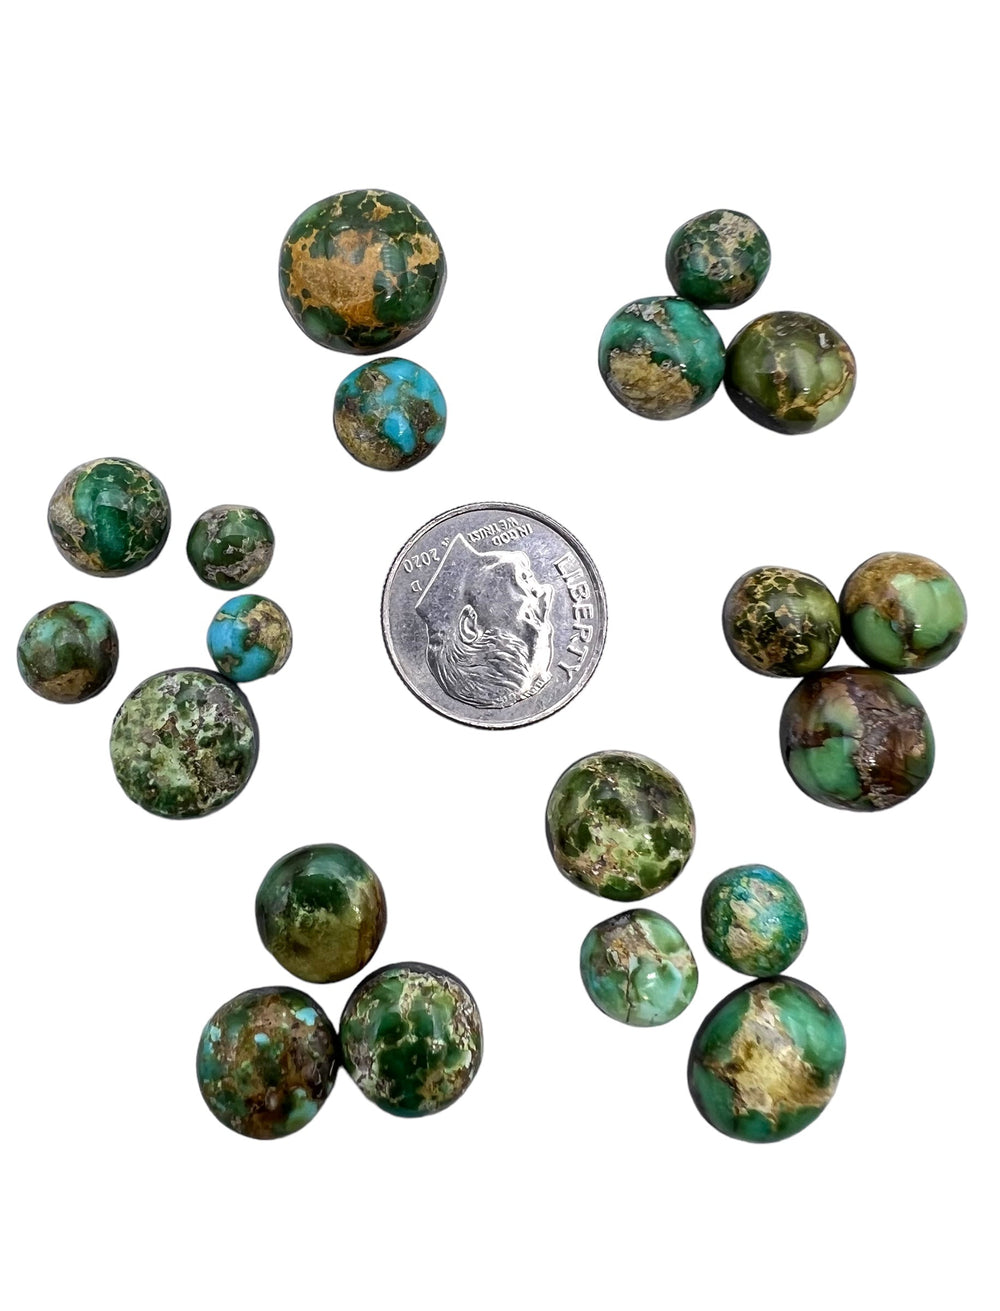 Sonora Gold Turquoise (Mexico) Round Mini Cabochon Lots